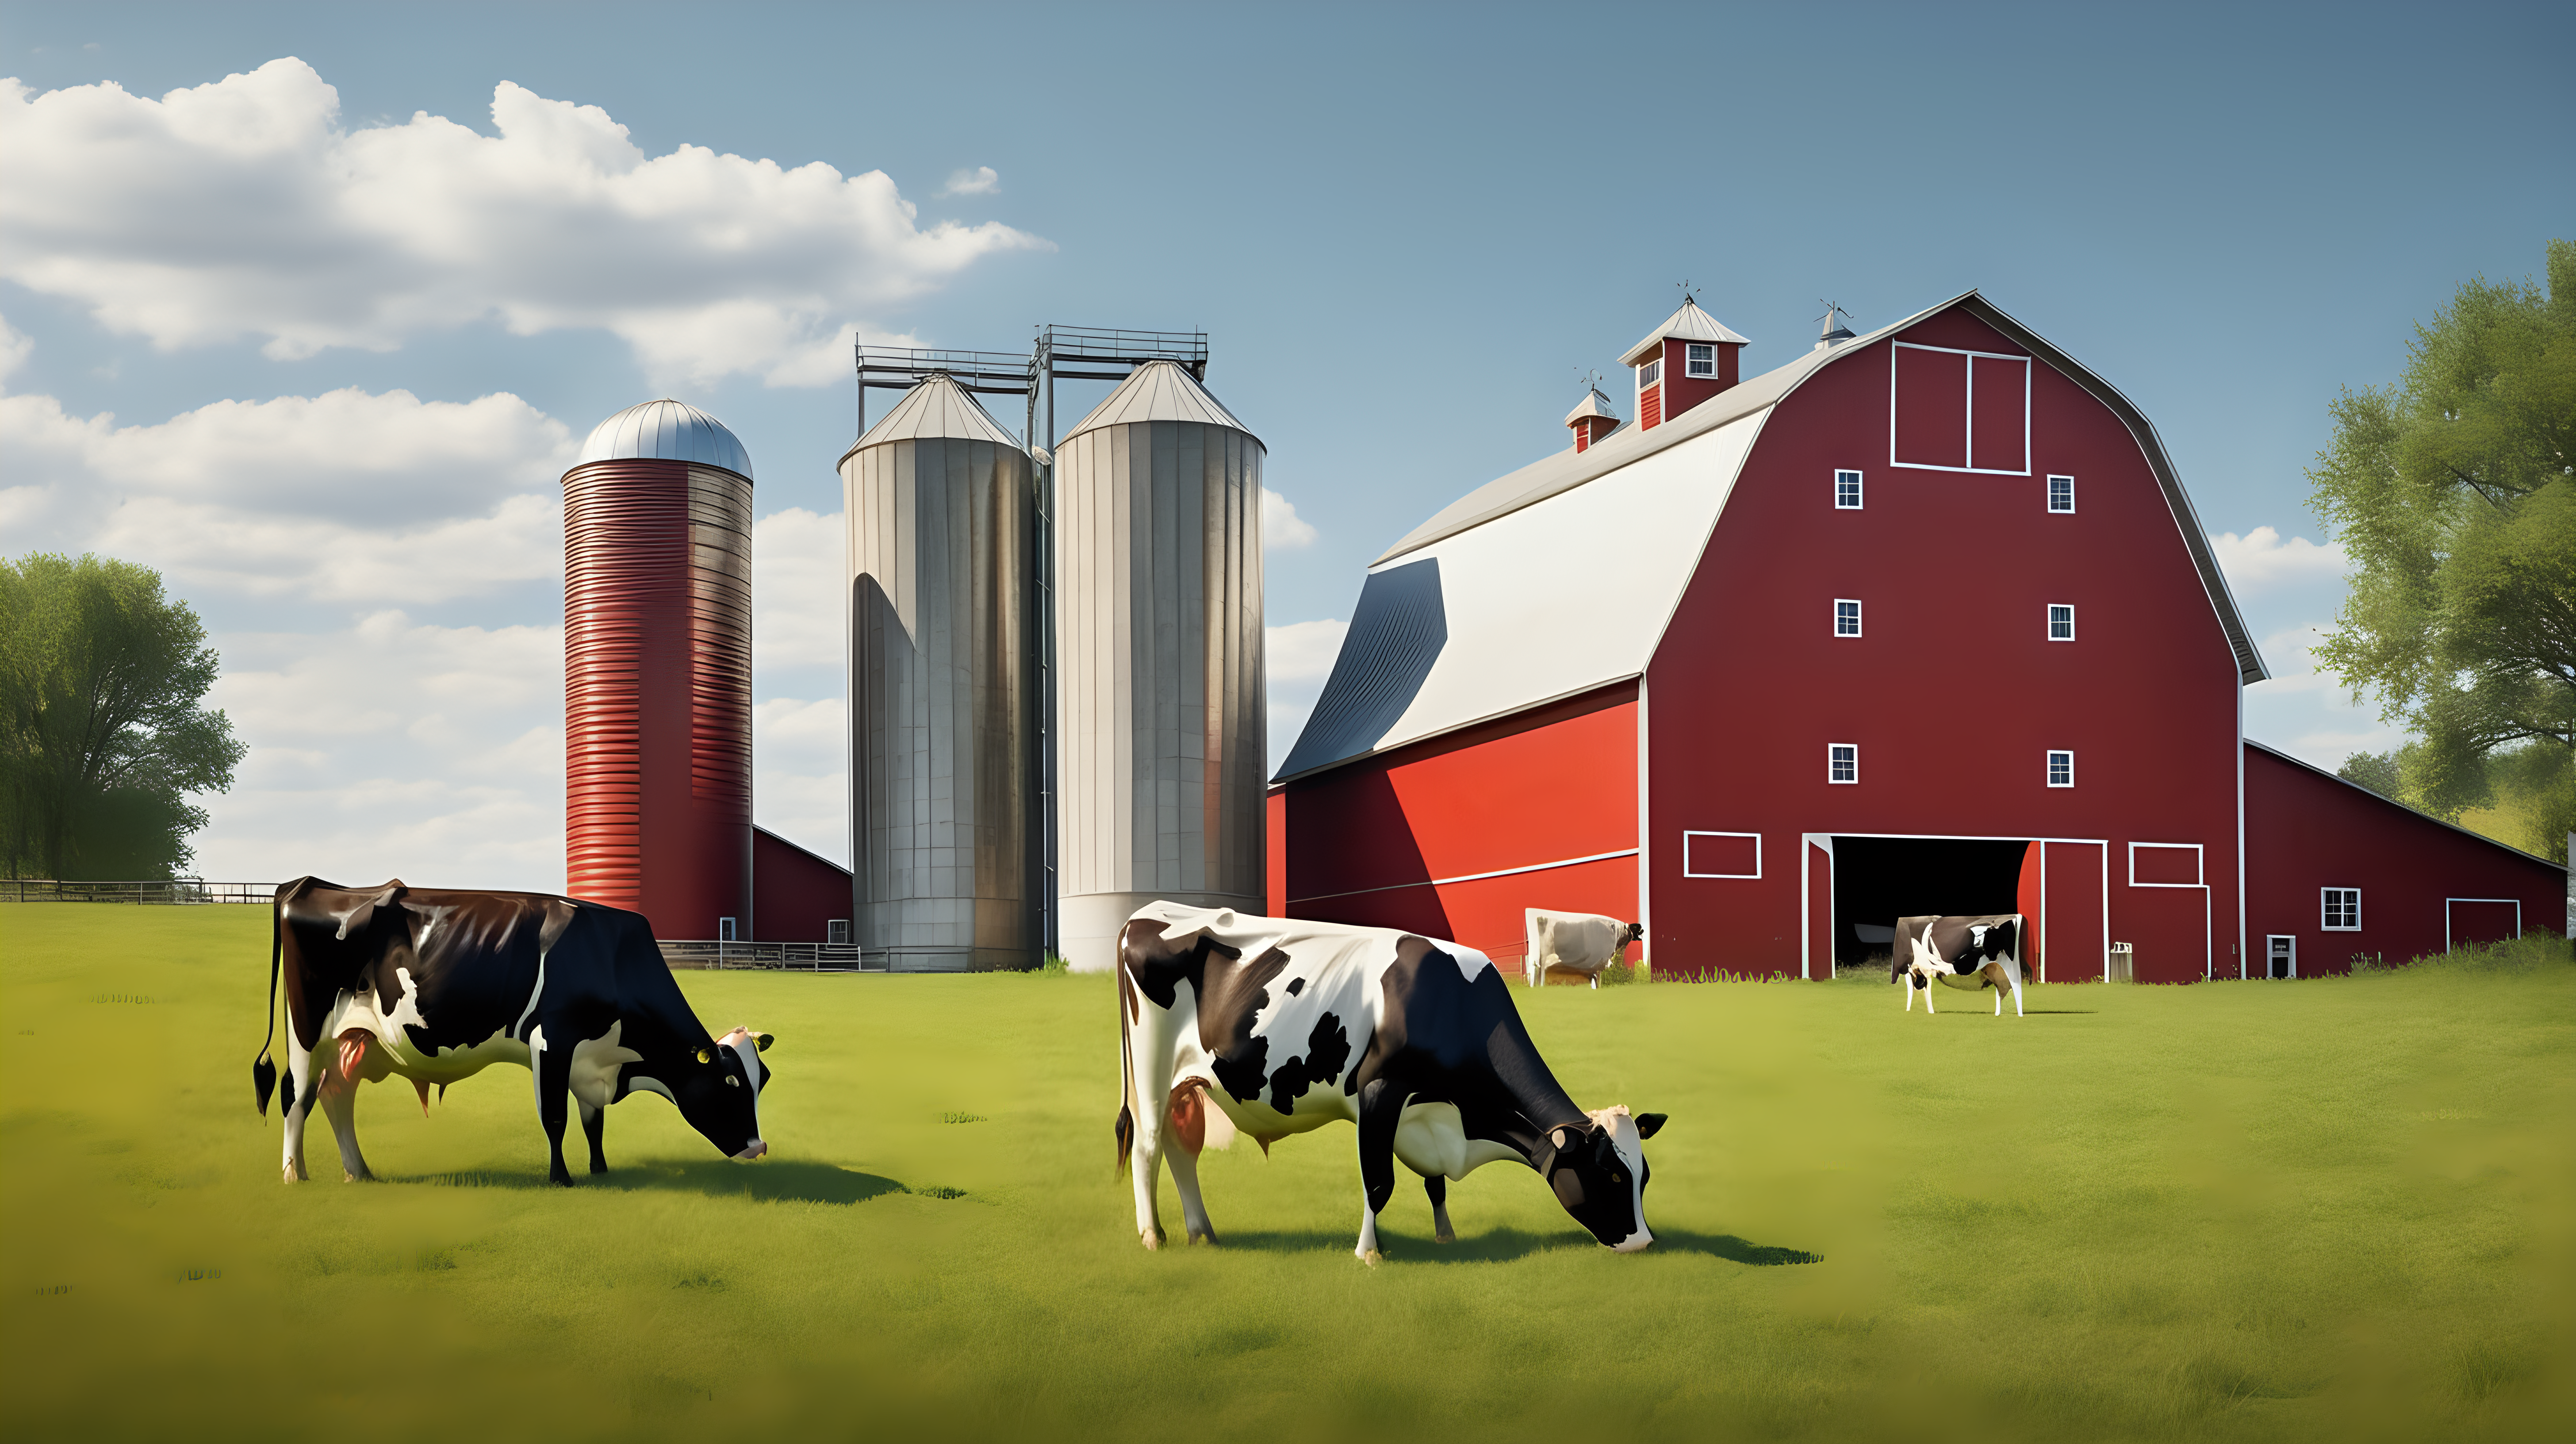 Cows grazing in a grassy farm pasture with red barn and silo. realistic photo